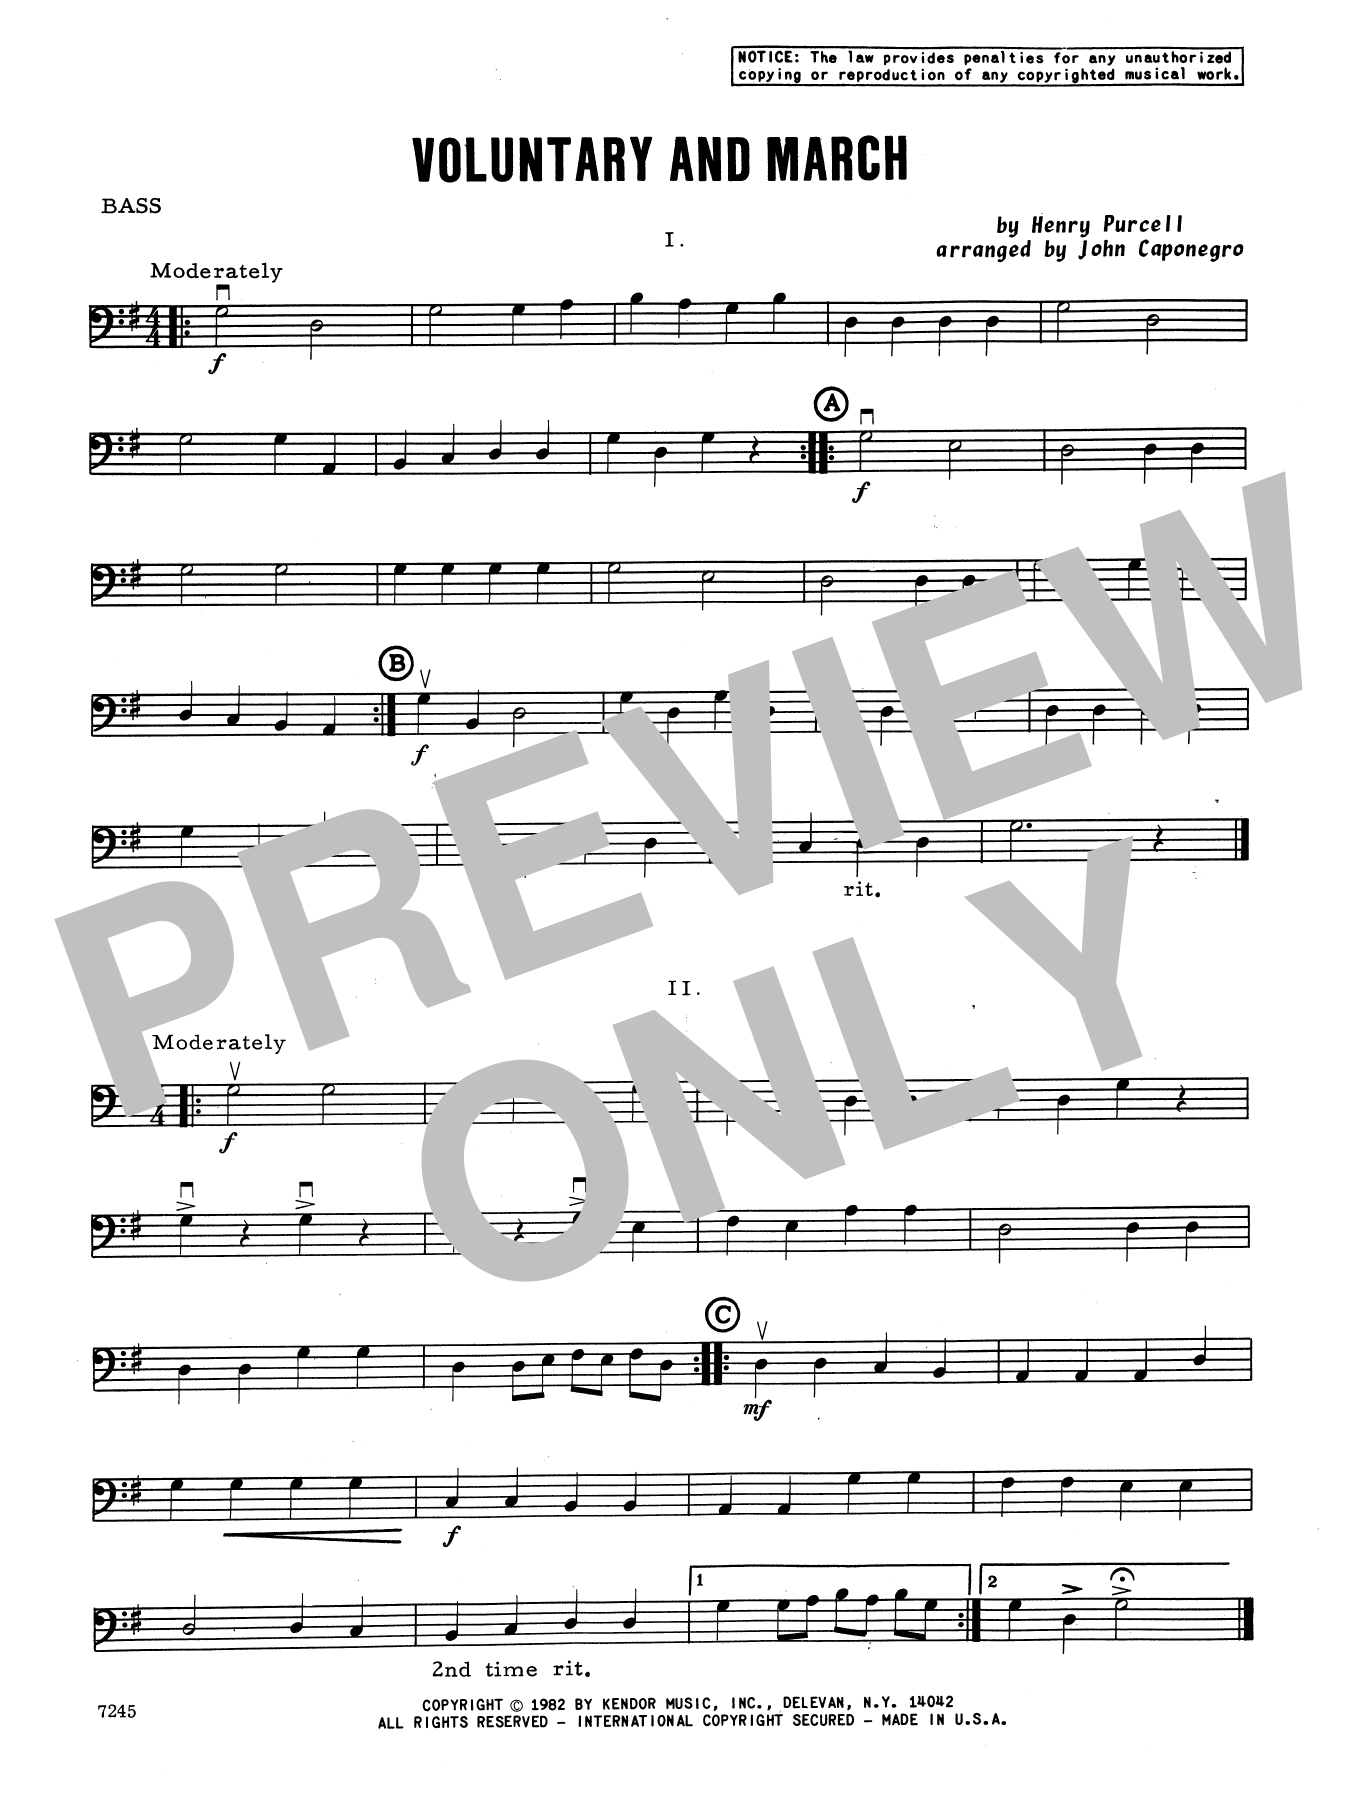 Download John Caponegro Voluntary and March - Bass Sheet Music